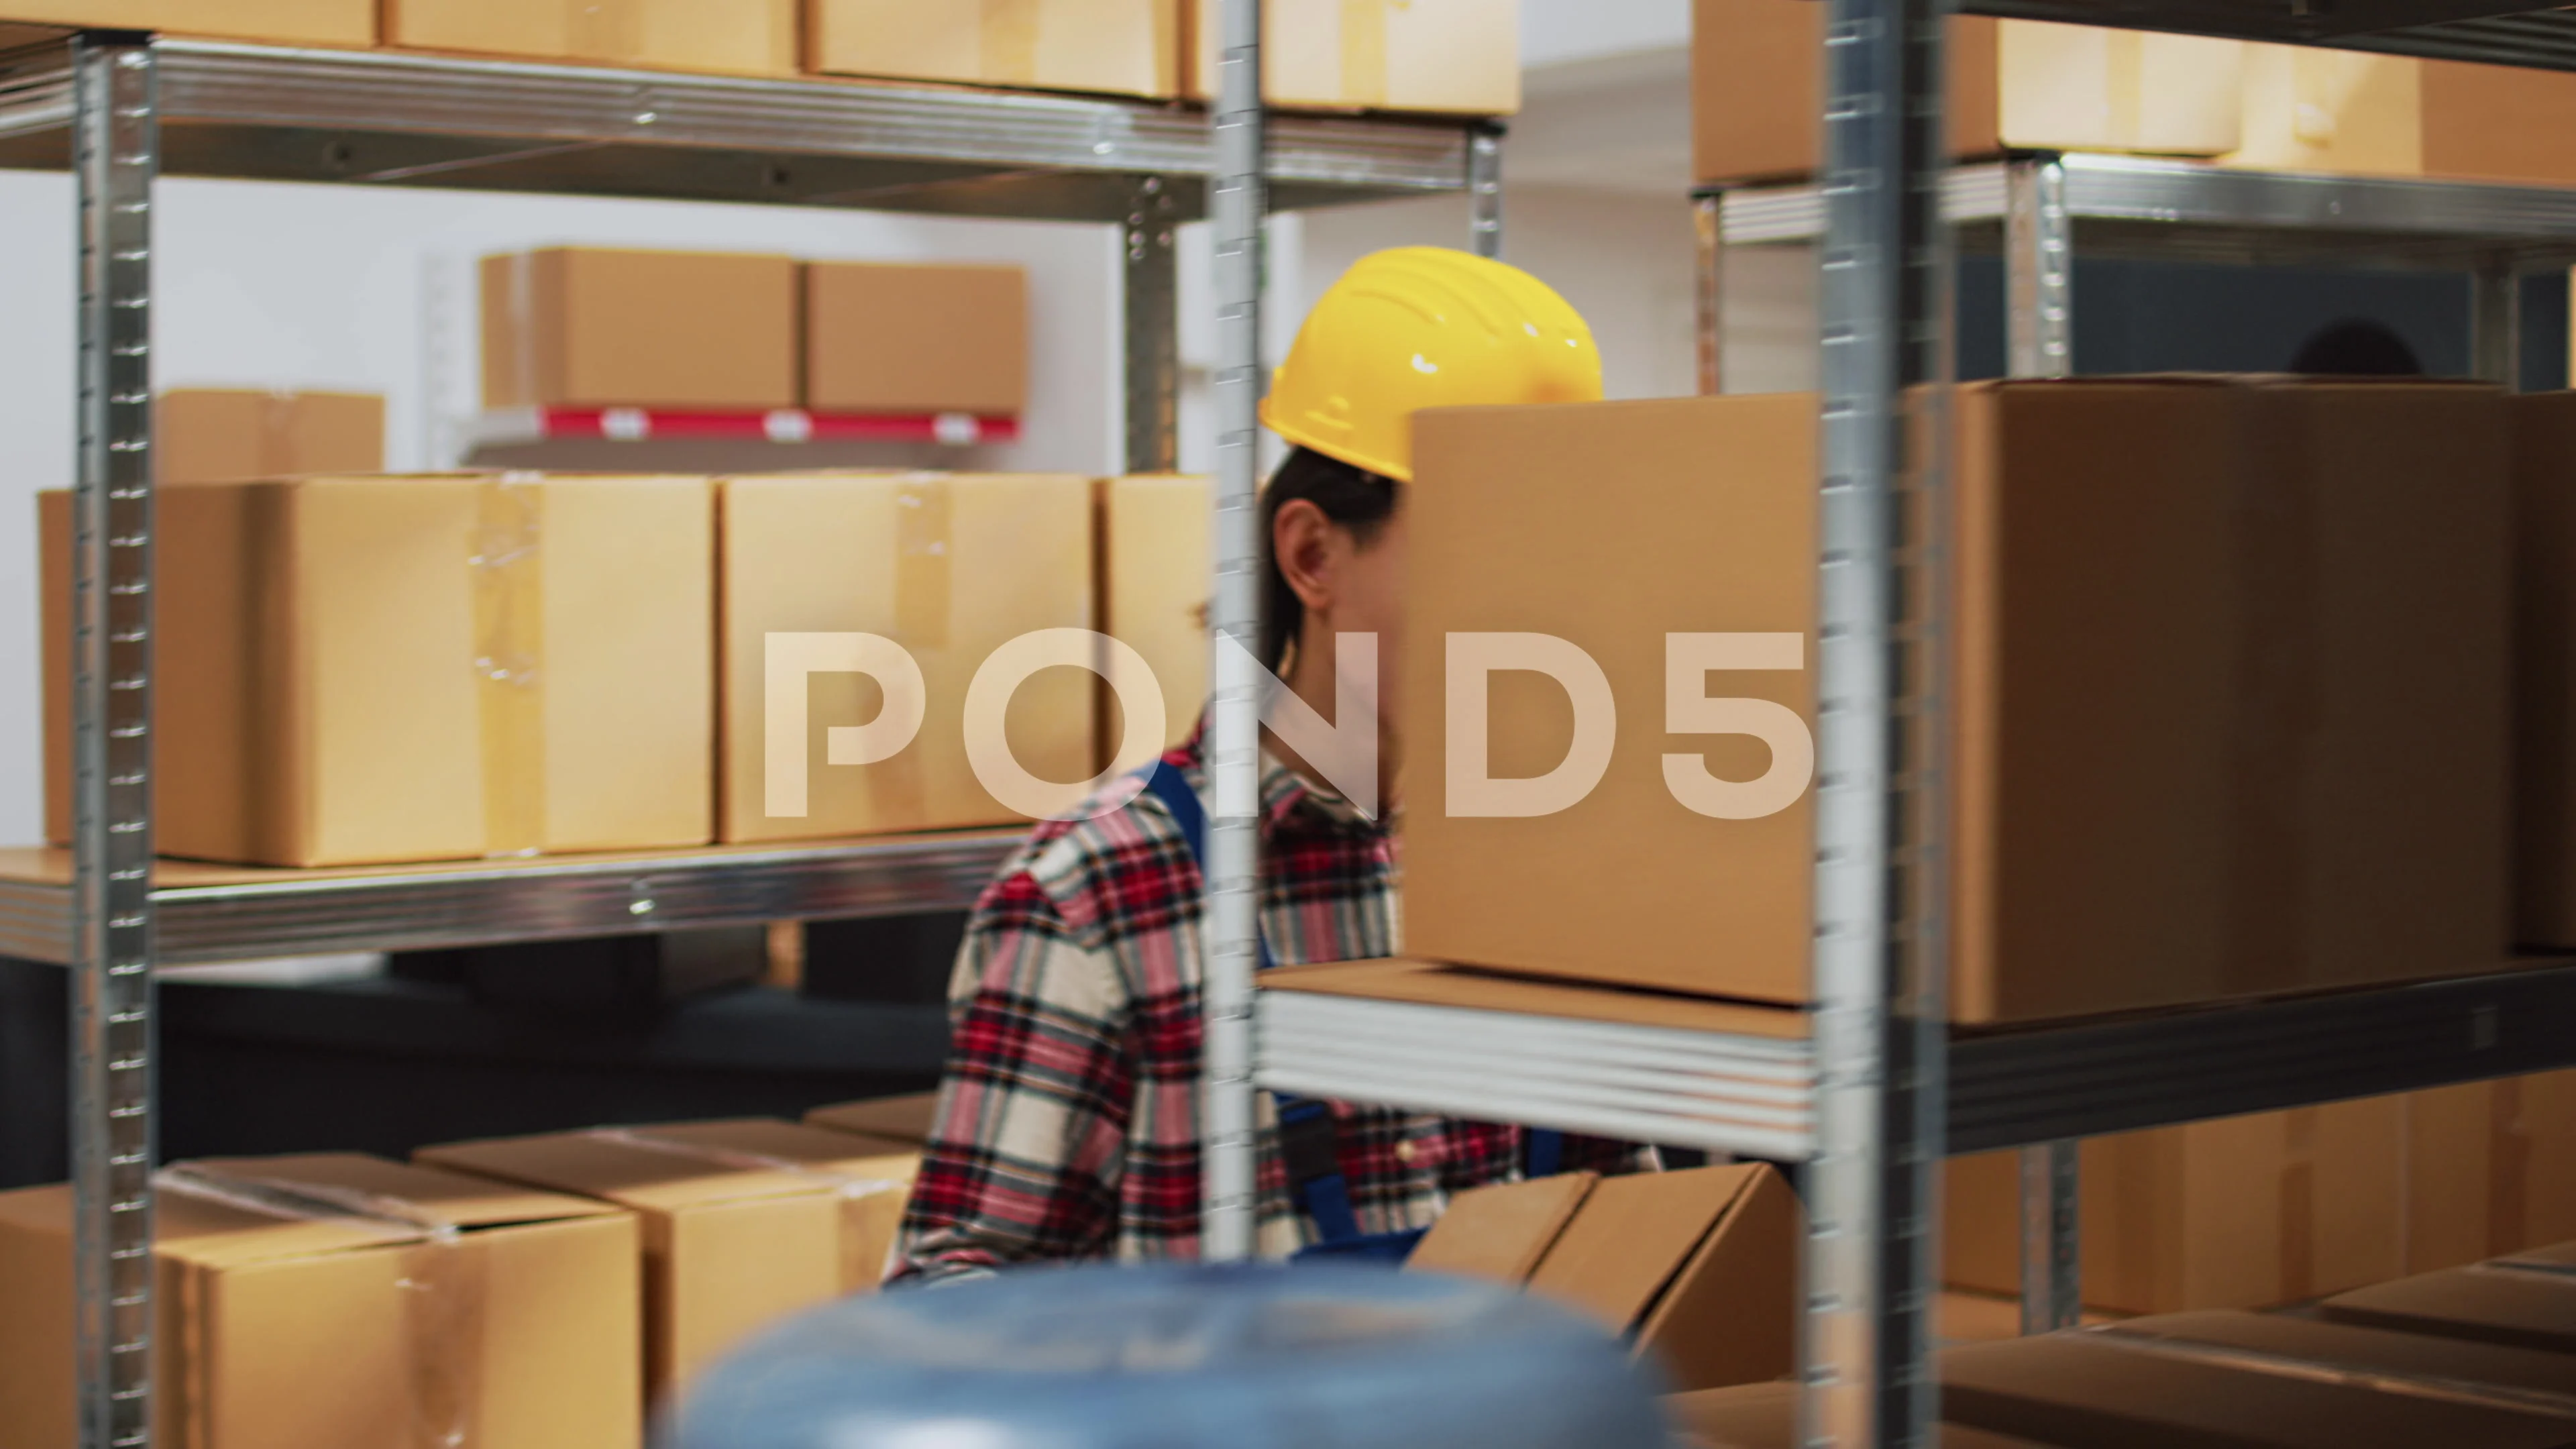 Asian guy organizing boxes with supplies on shelves Stock Photo by DC_Studio